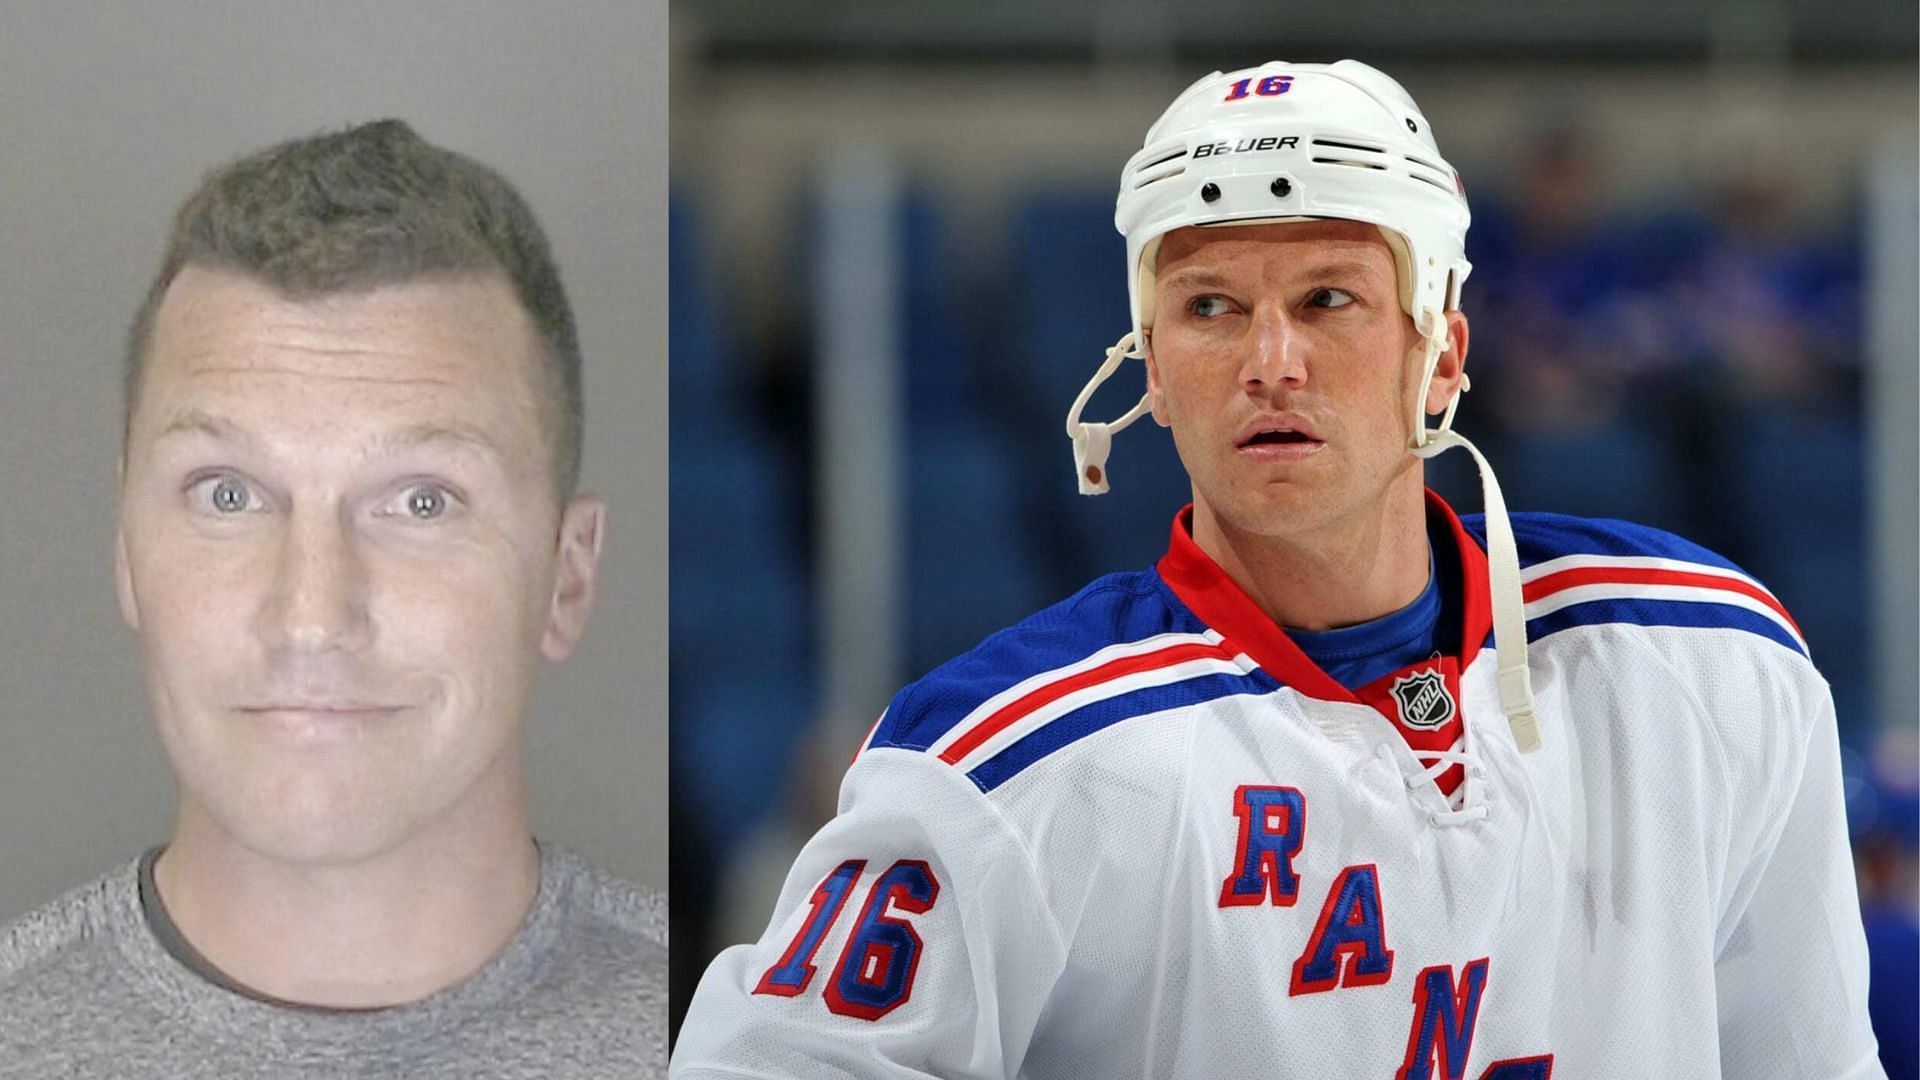 Sean Avery got arrested before his wedding.